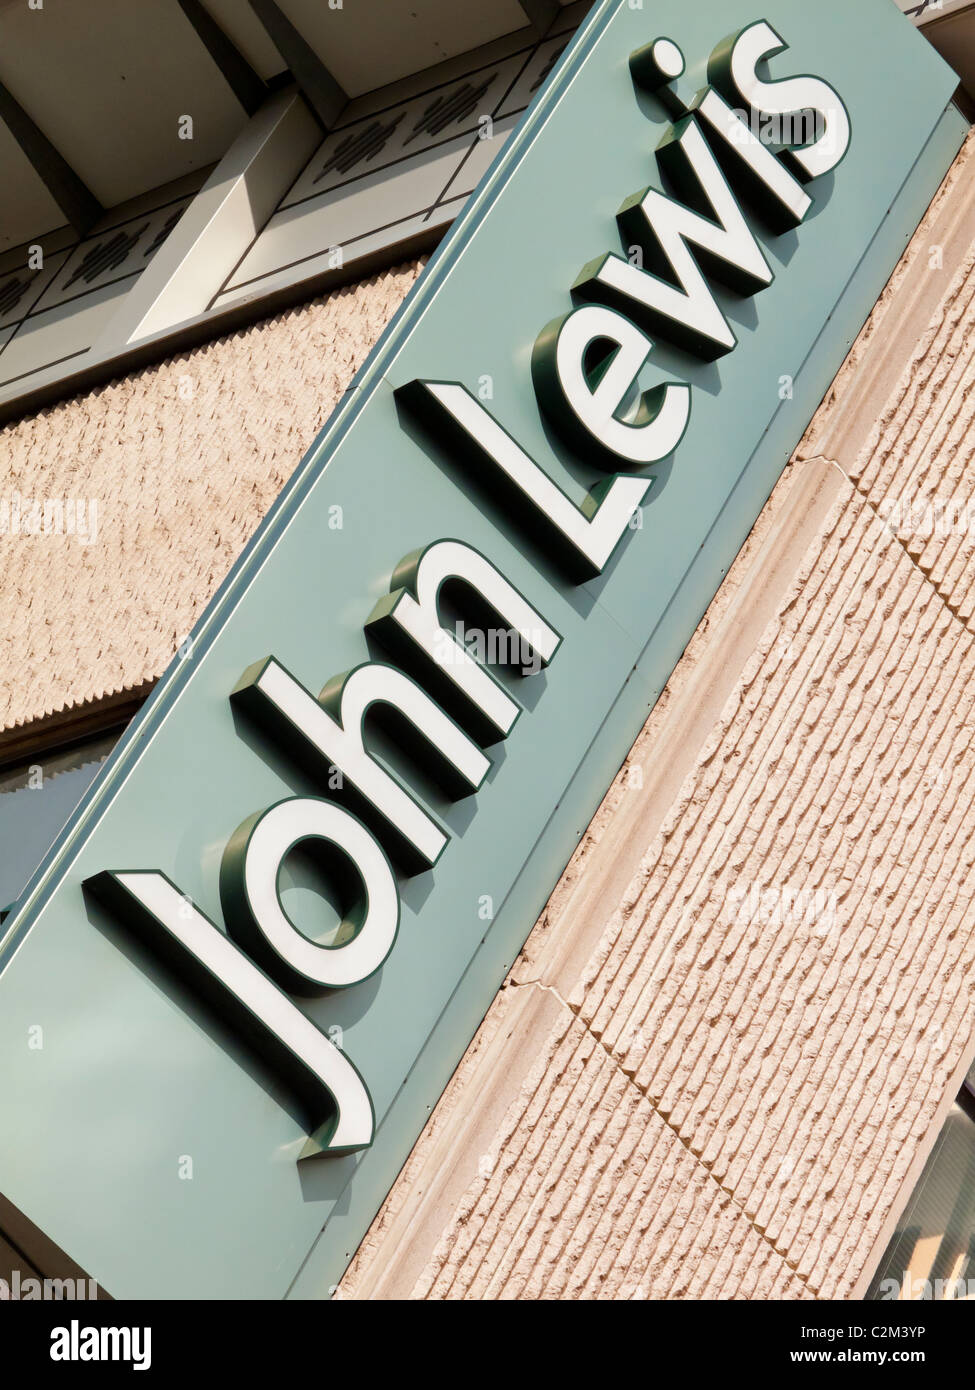 Sign outside a branch of the British John Lewis department store chain belonging to the John Lewis Partnership Stock Photo